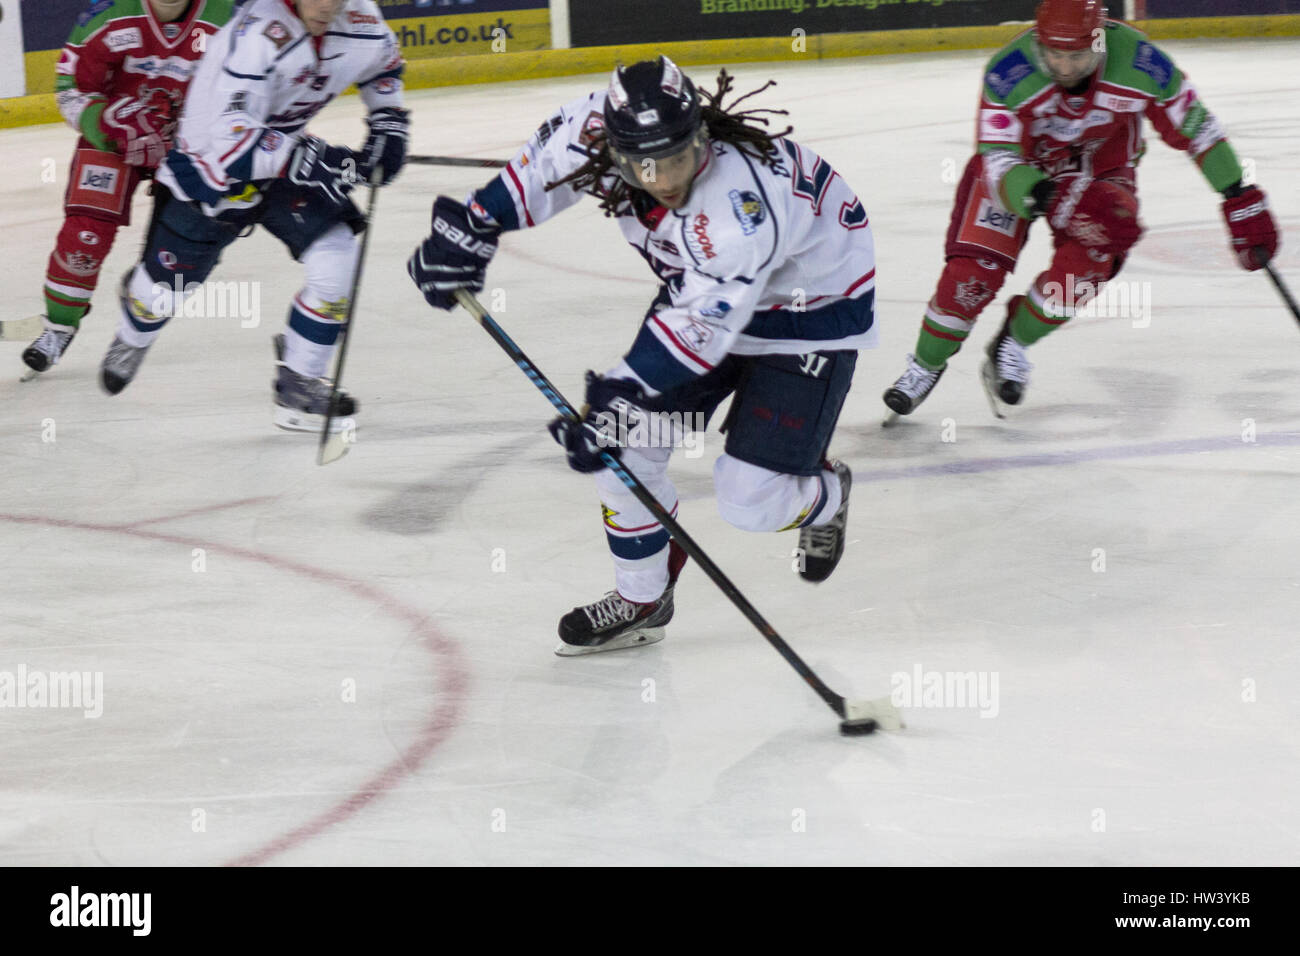 CARDIFF, UNITED KINGDOM. Cardiff Devils Ice Hockey team playing a home game in the Cardiff Ice Arena. Stock Photo